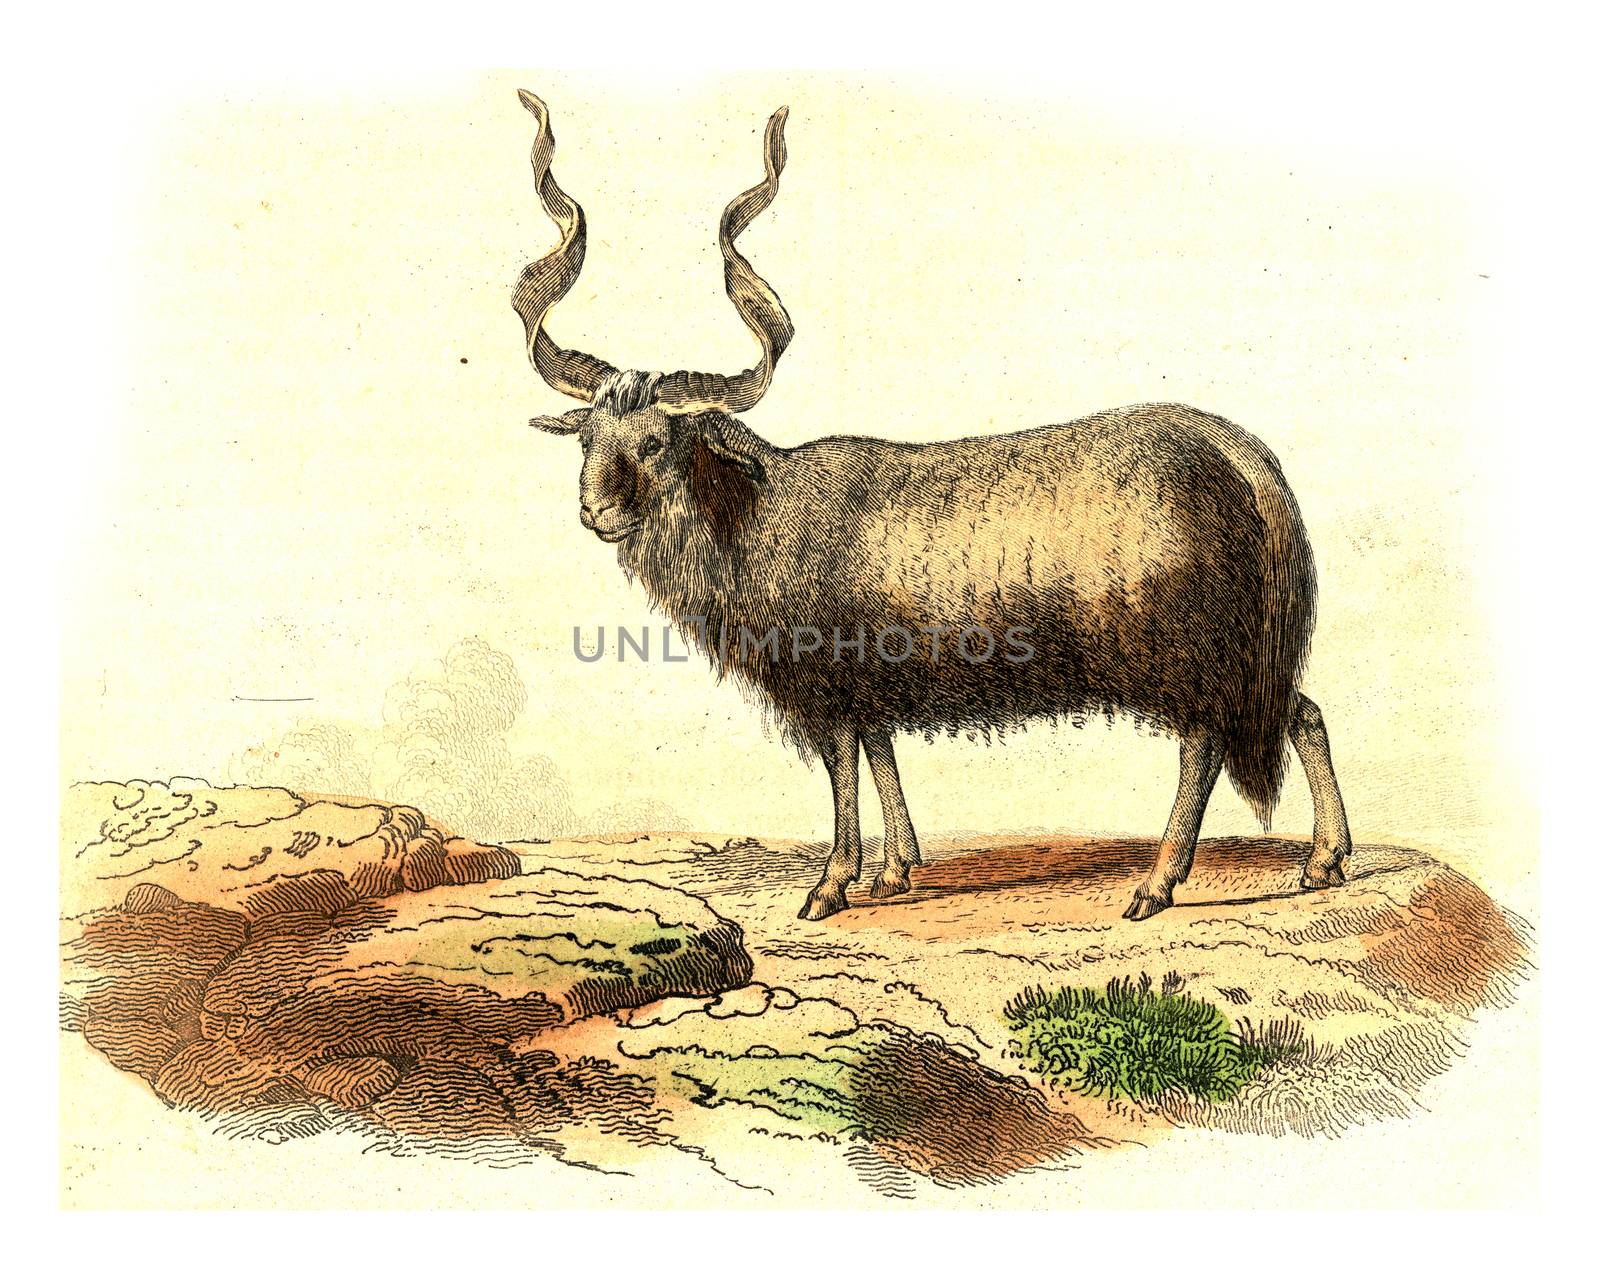 Aries of Walachia, vintage engraved illustration. From Buffon Complete Work.
